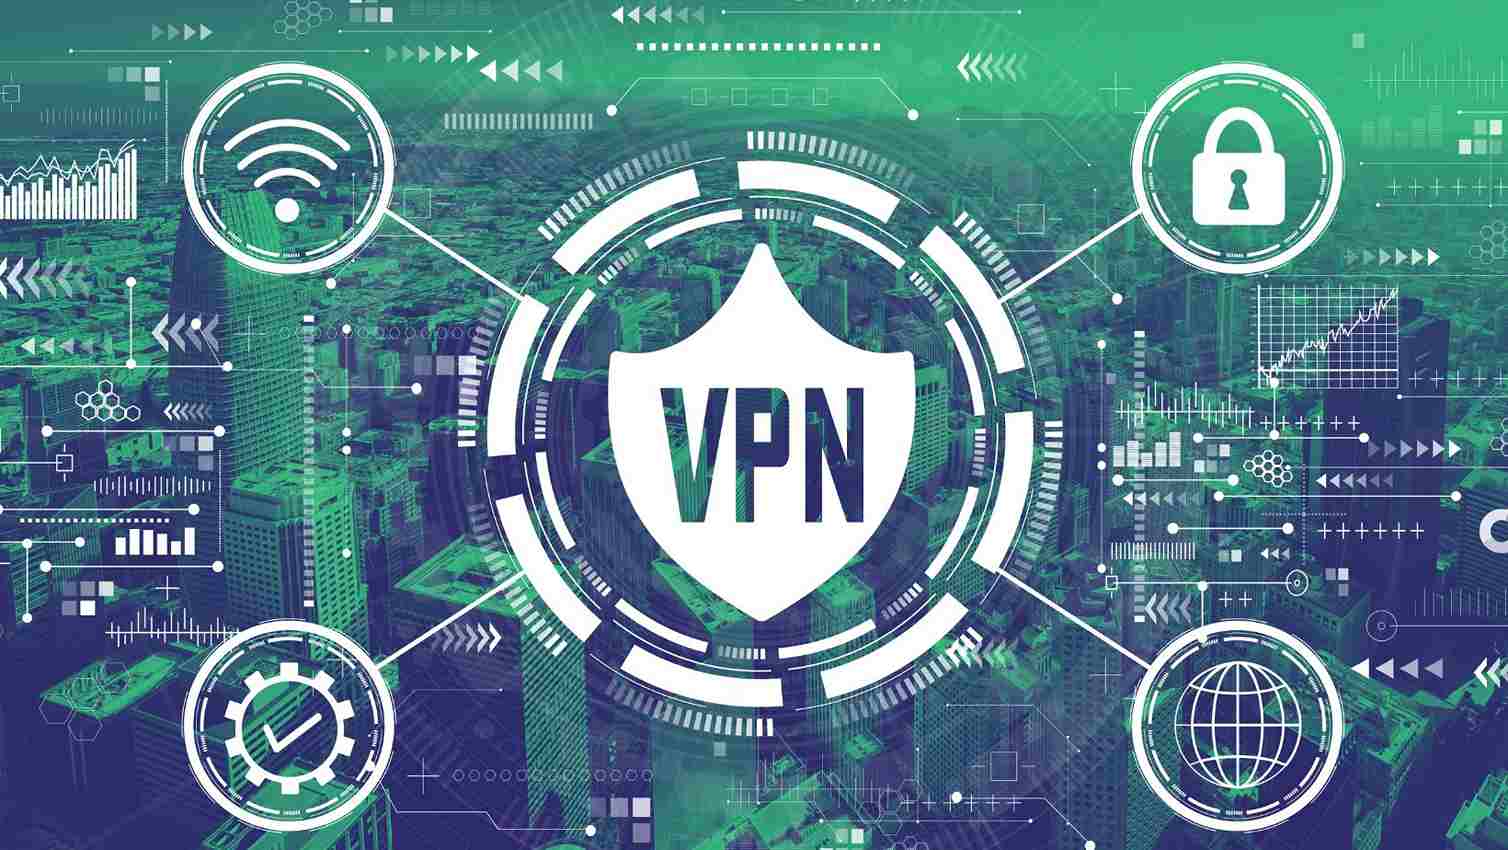 offline files vpn issues and causes